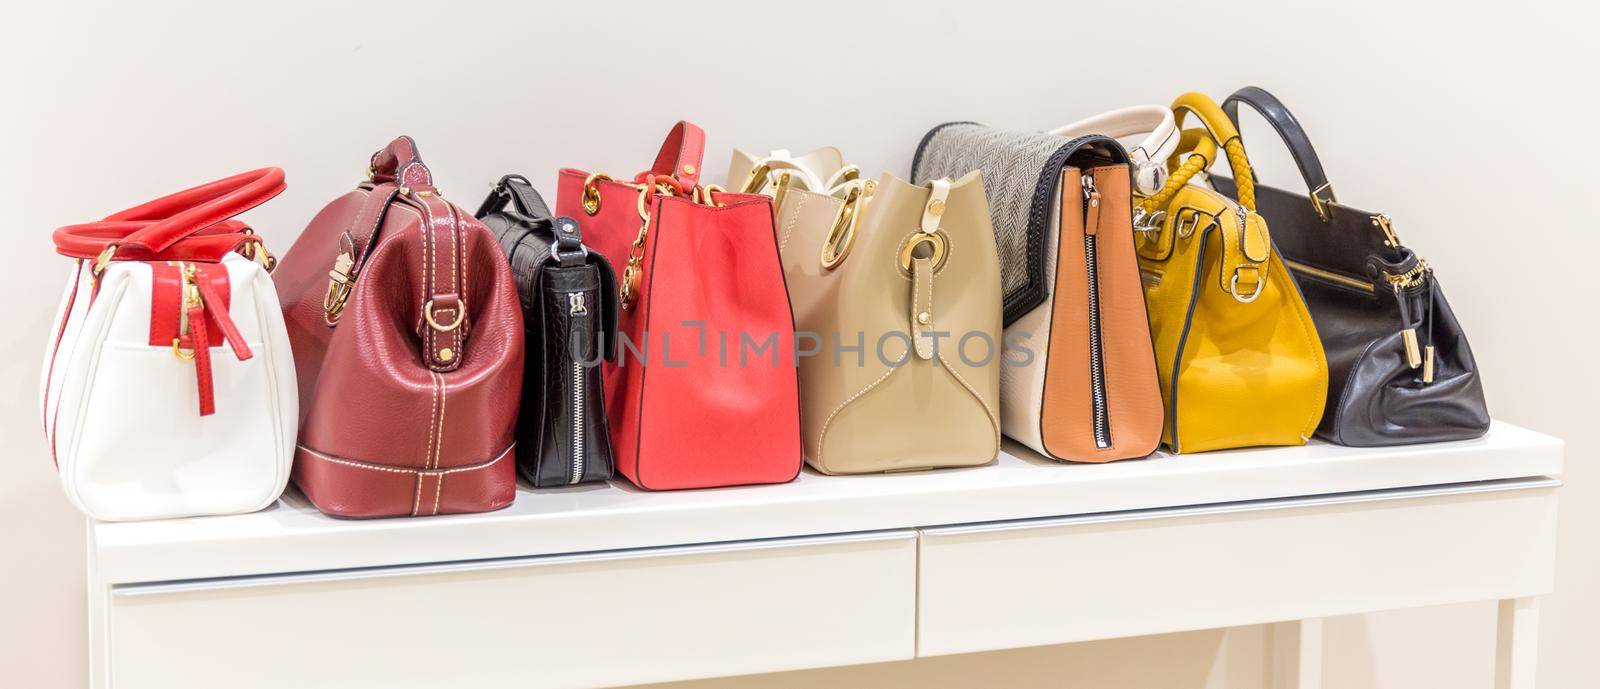 Collection of handbags standing in a row by Mariakray